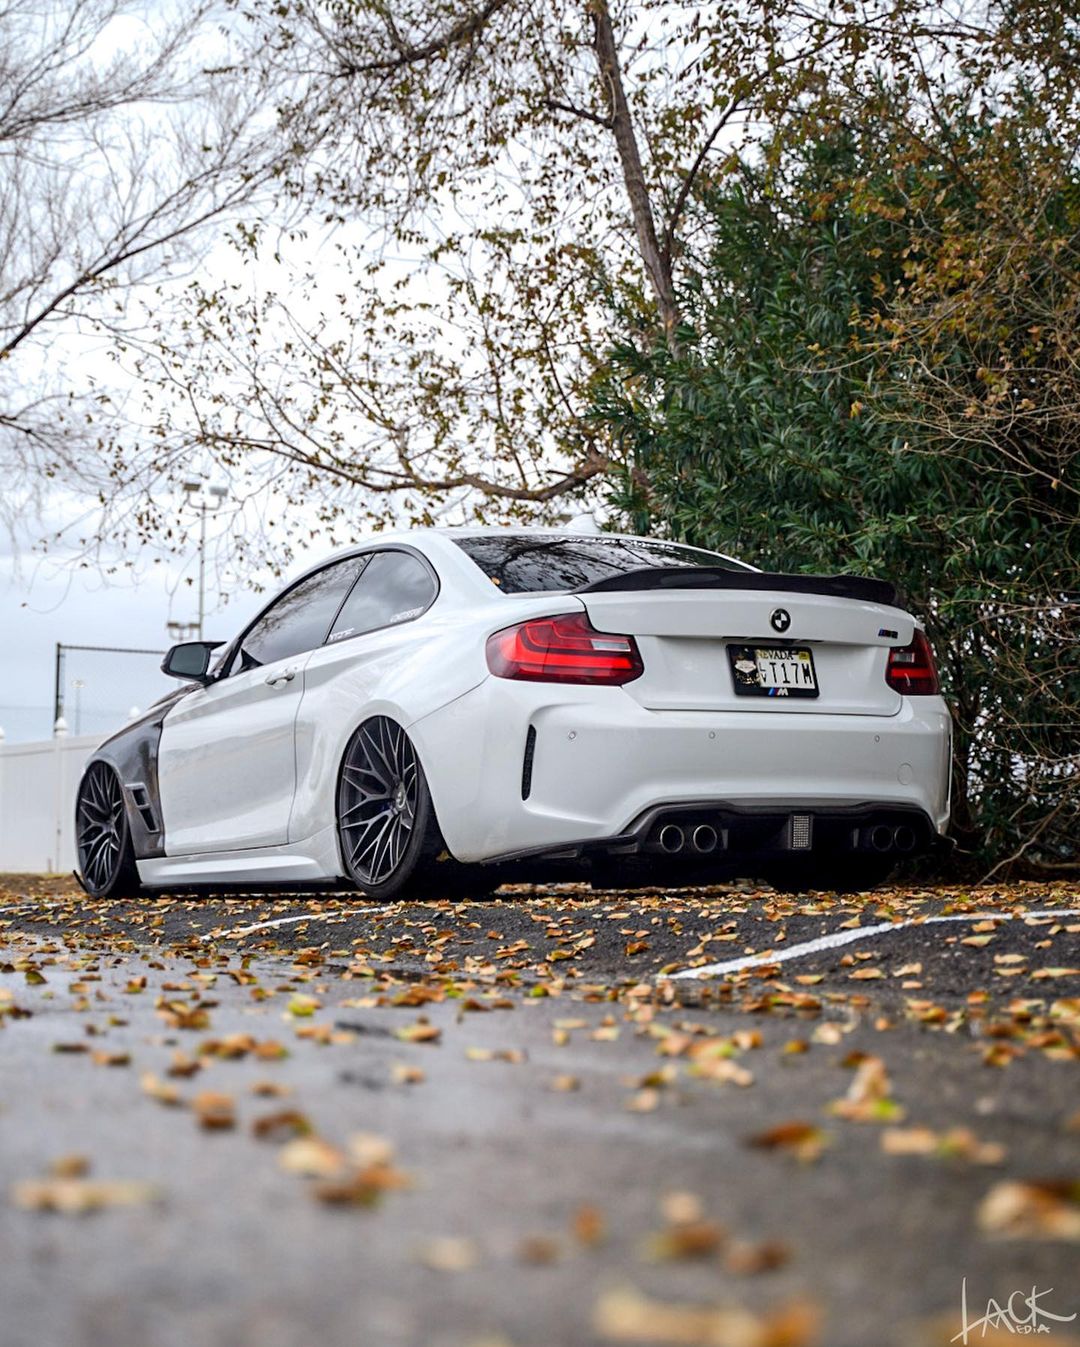 Check our price and buy CMST Carbon Fiber Body Kit set for BMW 2 Series F22!